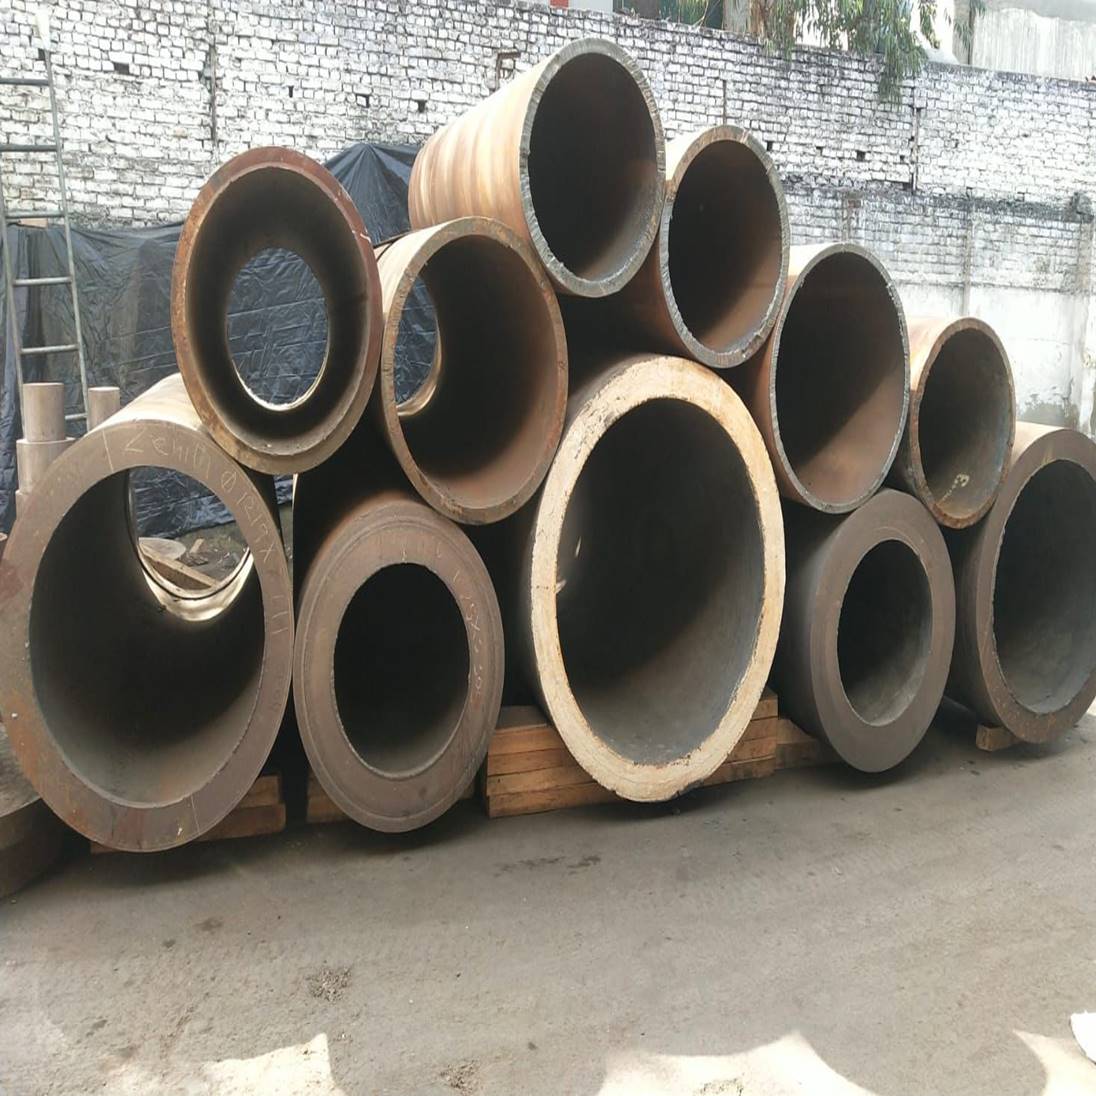 Pipe stock of new rollers for paper industry.
.
.
#zenith #rollers #zenithrollers #manufacturer #factory #stock #paperindustry #papermill #pipe #industry #industrial #rubbers #business #privatelimited #twitterpost #Twitter